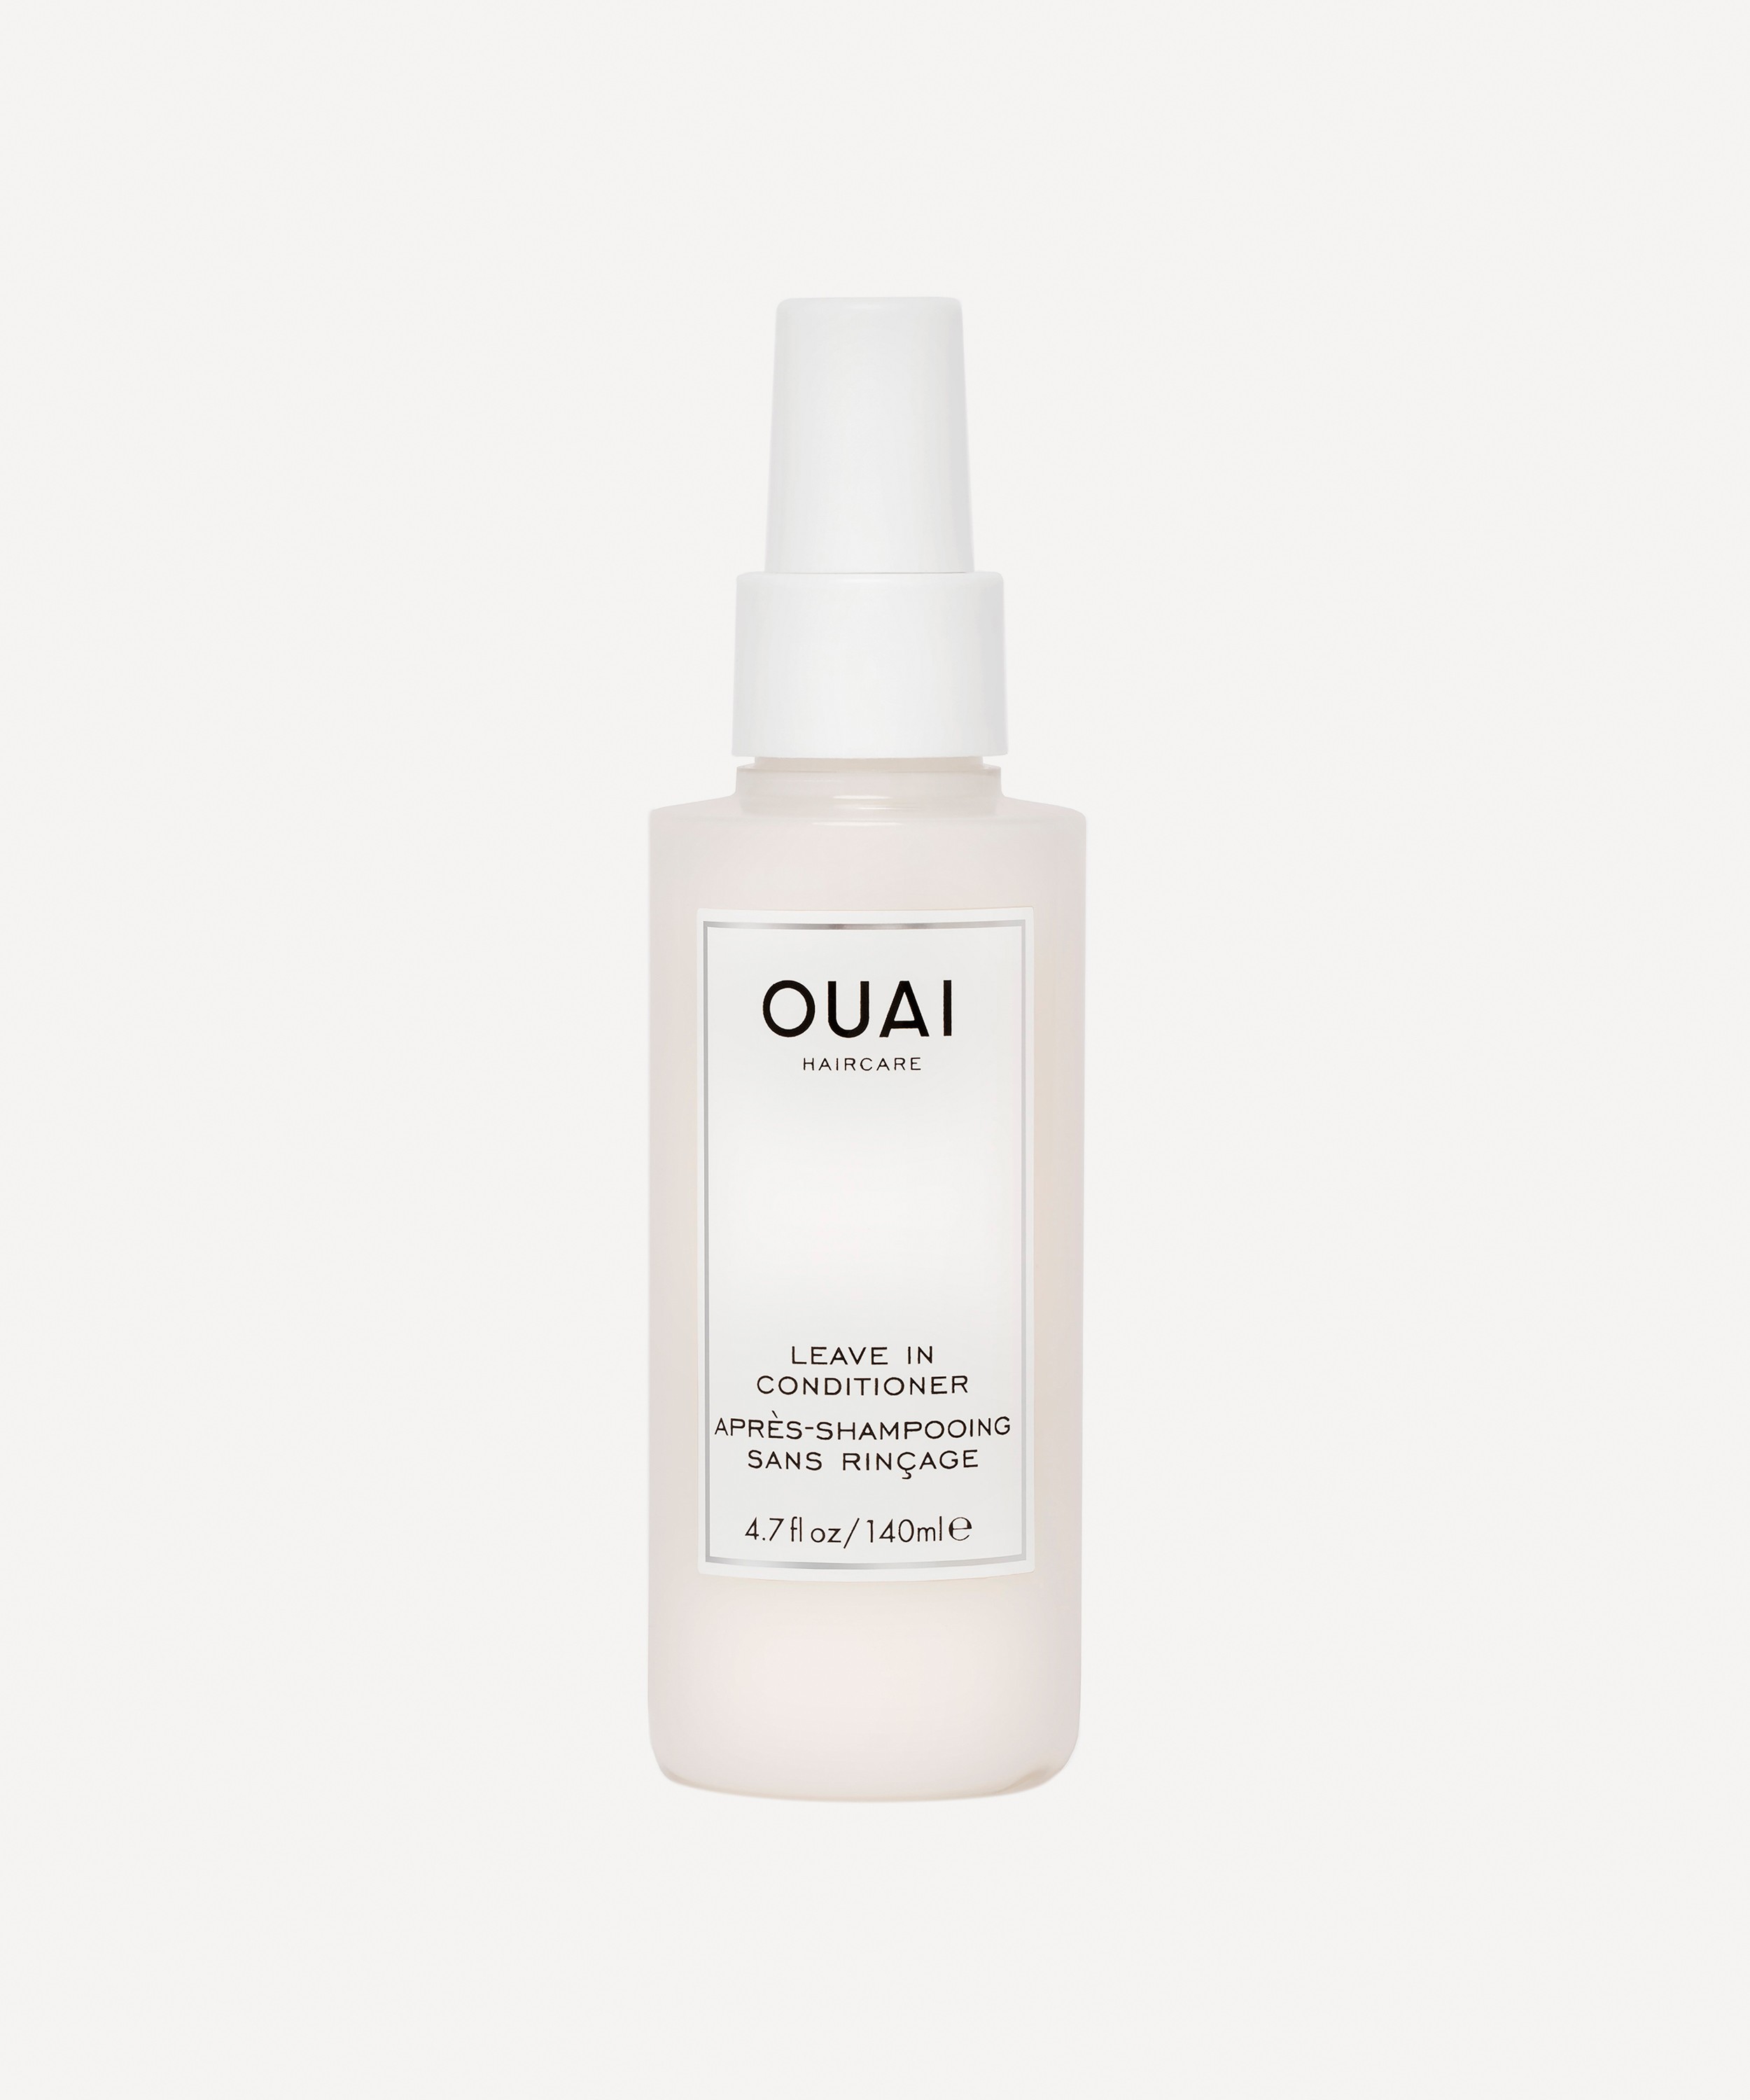 OUAI - Leave-In Conditioner 140ml image number 0